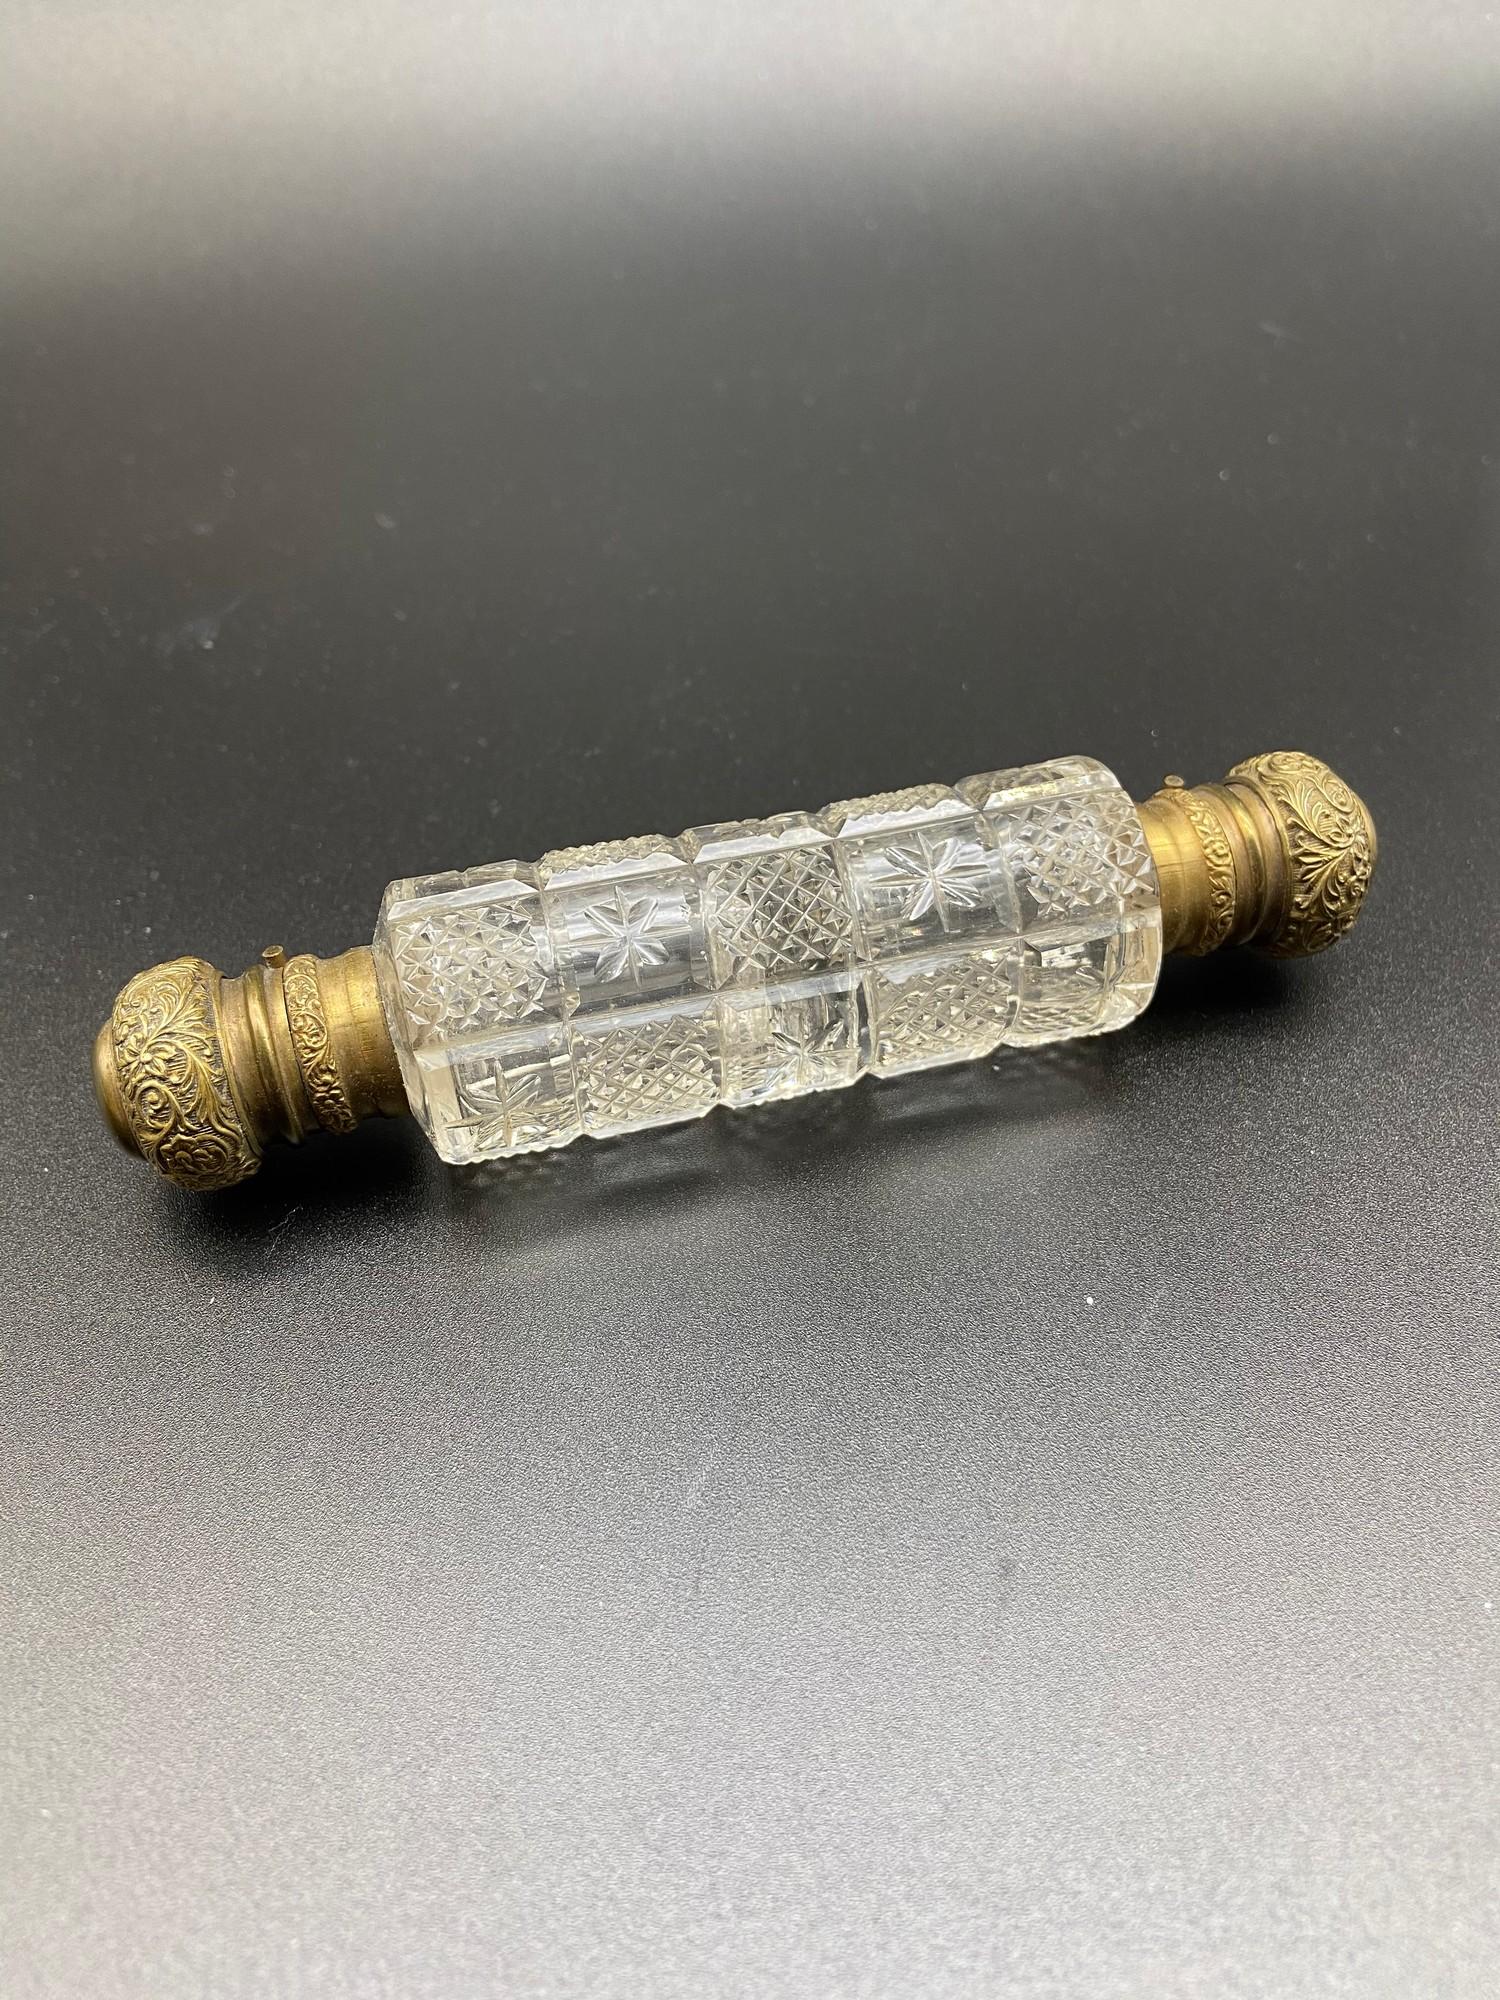 Antique double ended perfume bottle. Designed with two gilt metal tops and cut glass body. Comes